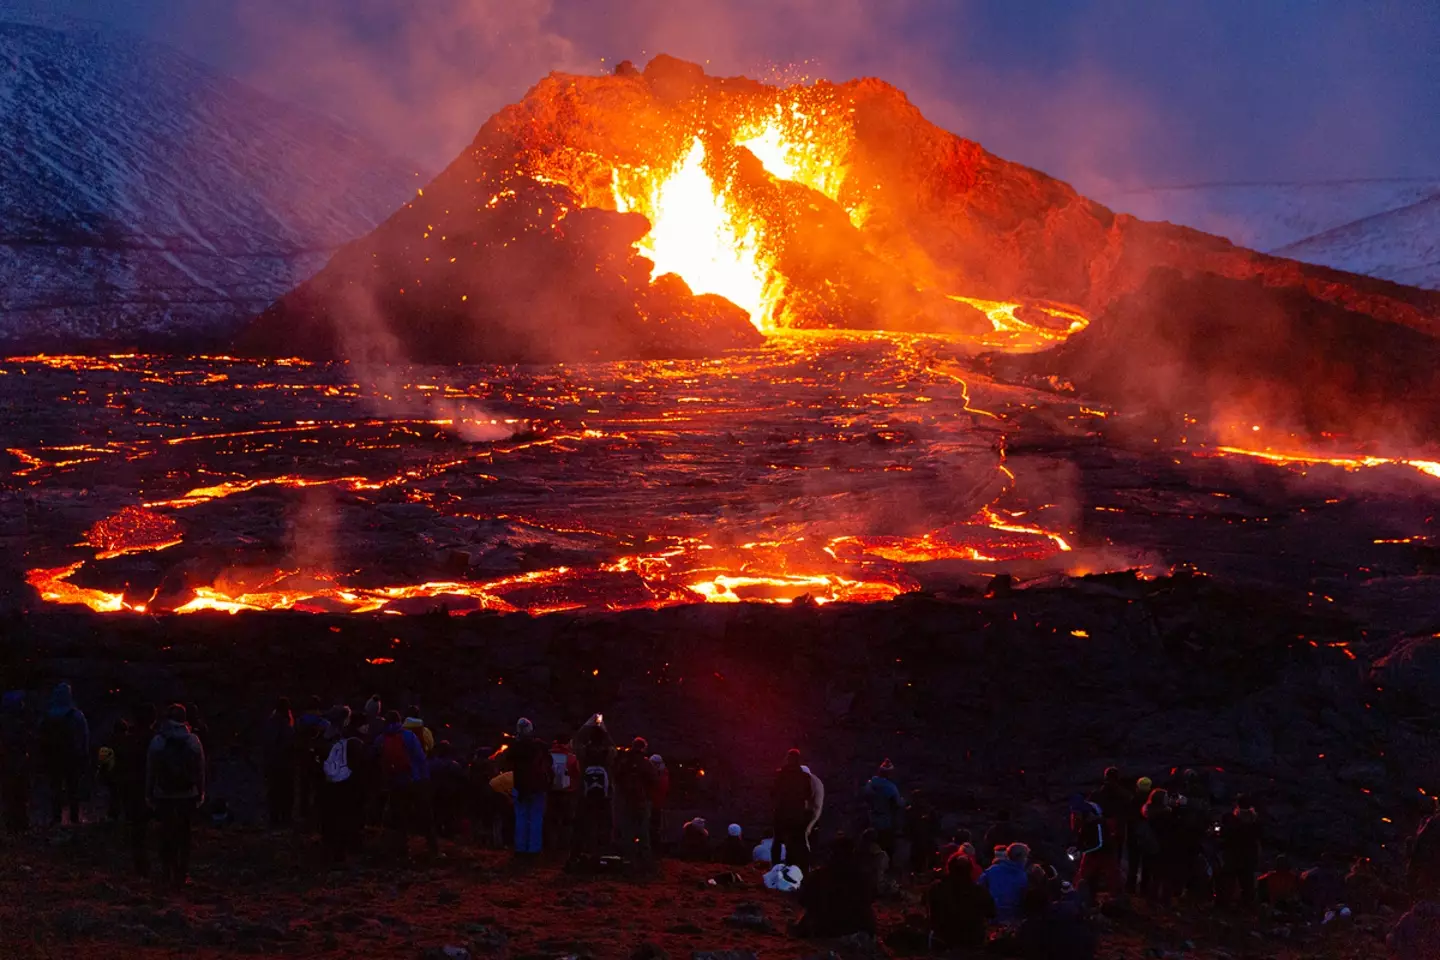 Experts say volcanic activity will ramp up.